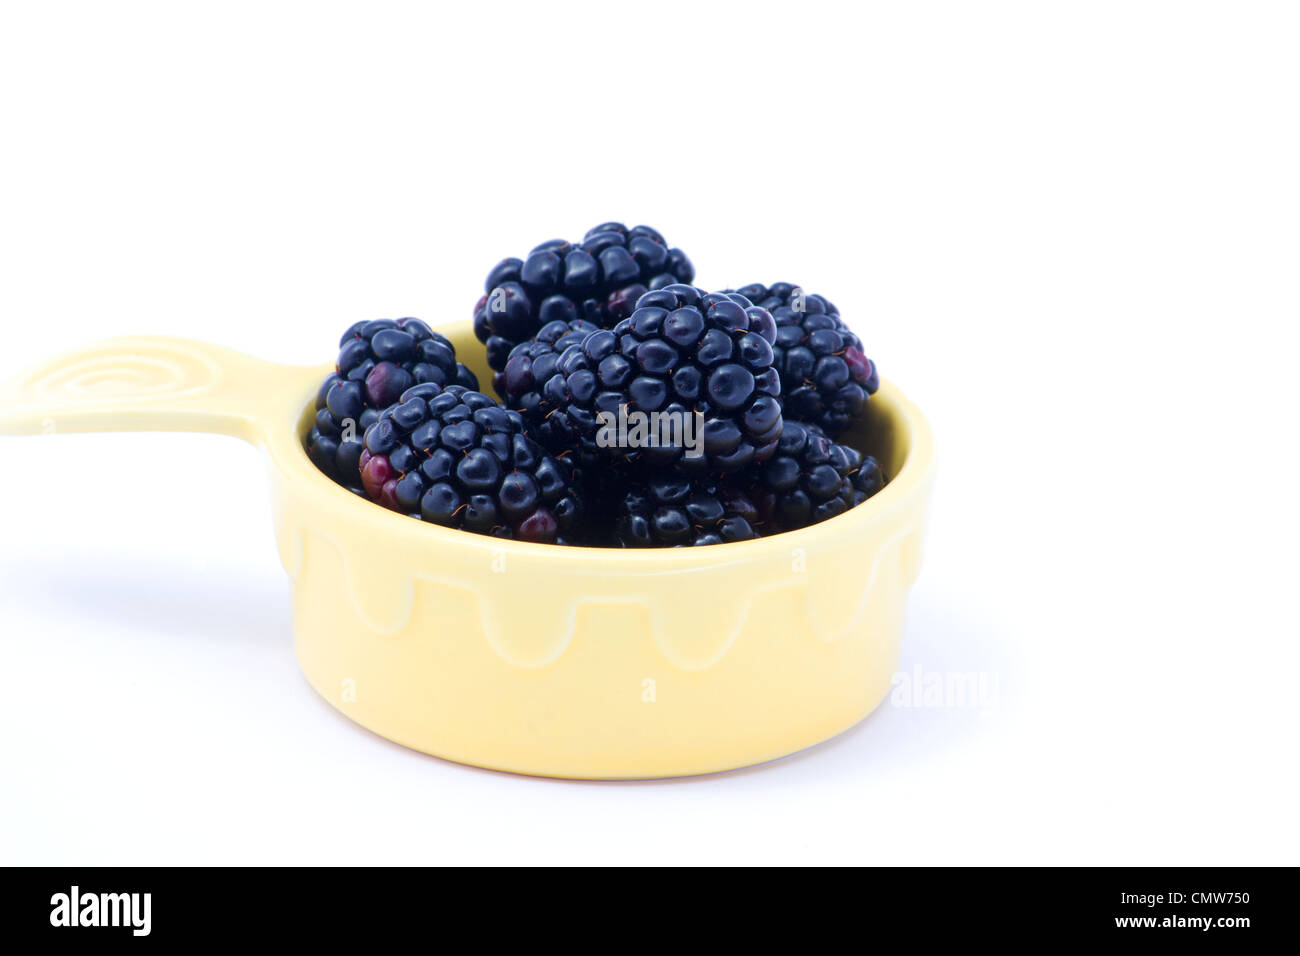 Fresh blackberries in a yellow bowl on white background Stock Photo